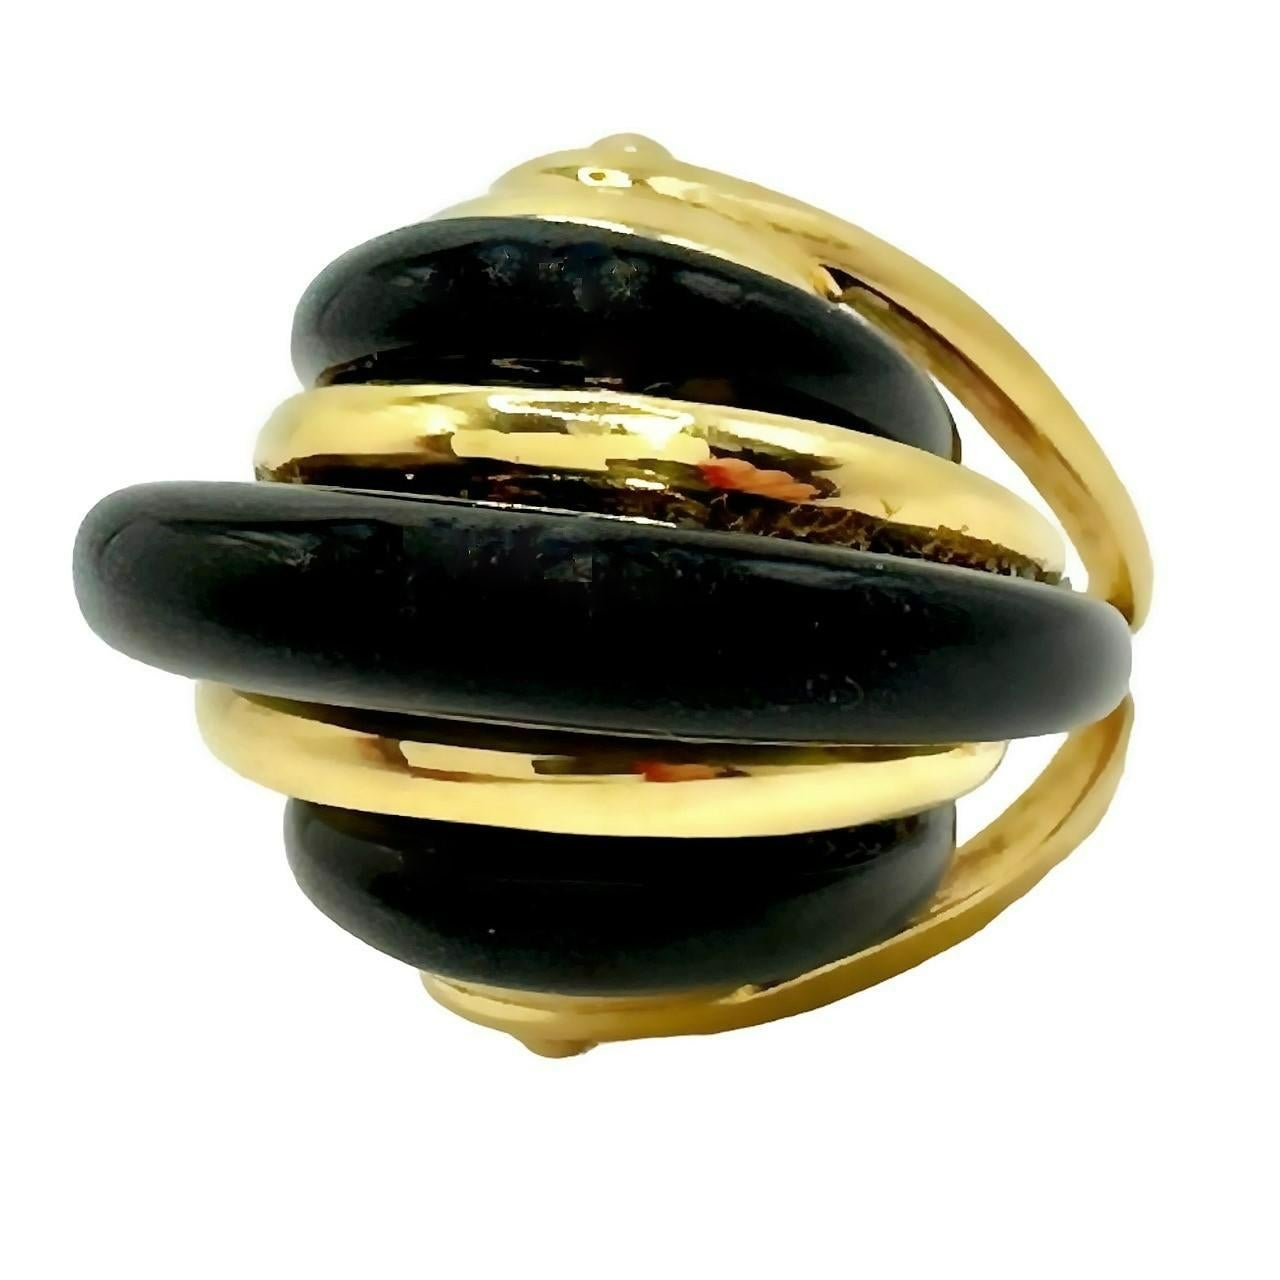 This unique and dramatic Mid-20th Century 18k yellow gold and onyx modernist ring is pure drama. The onyx center of it's design area soars to a 
full 3/4 inches above the finger. The ring is stylish, with alternating bands of gold and black onyx